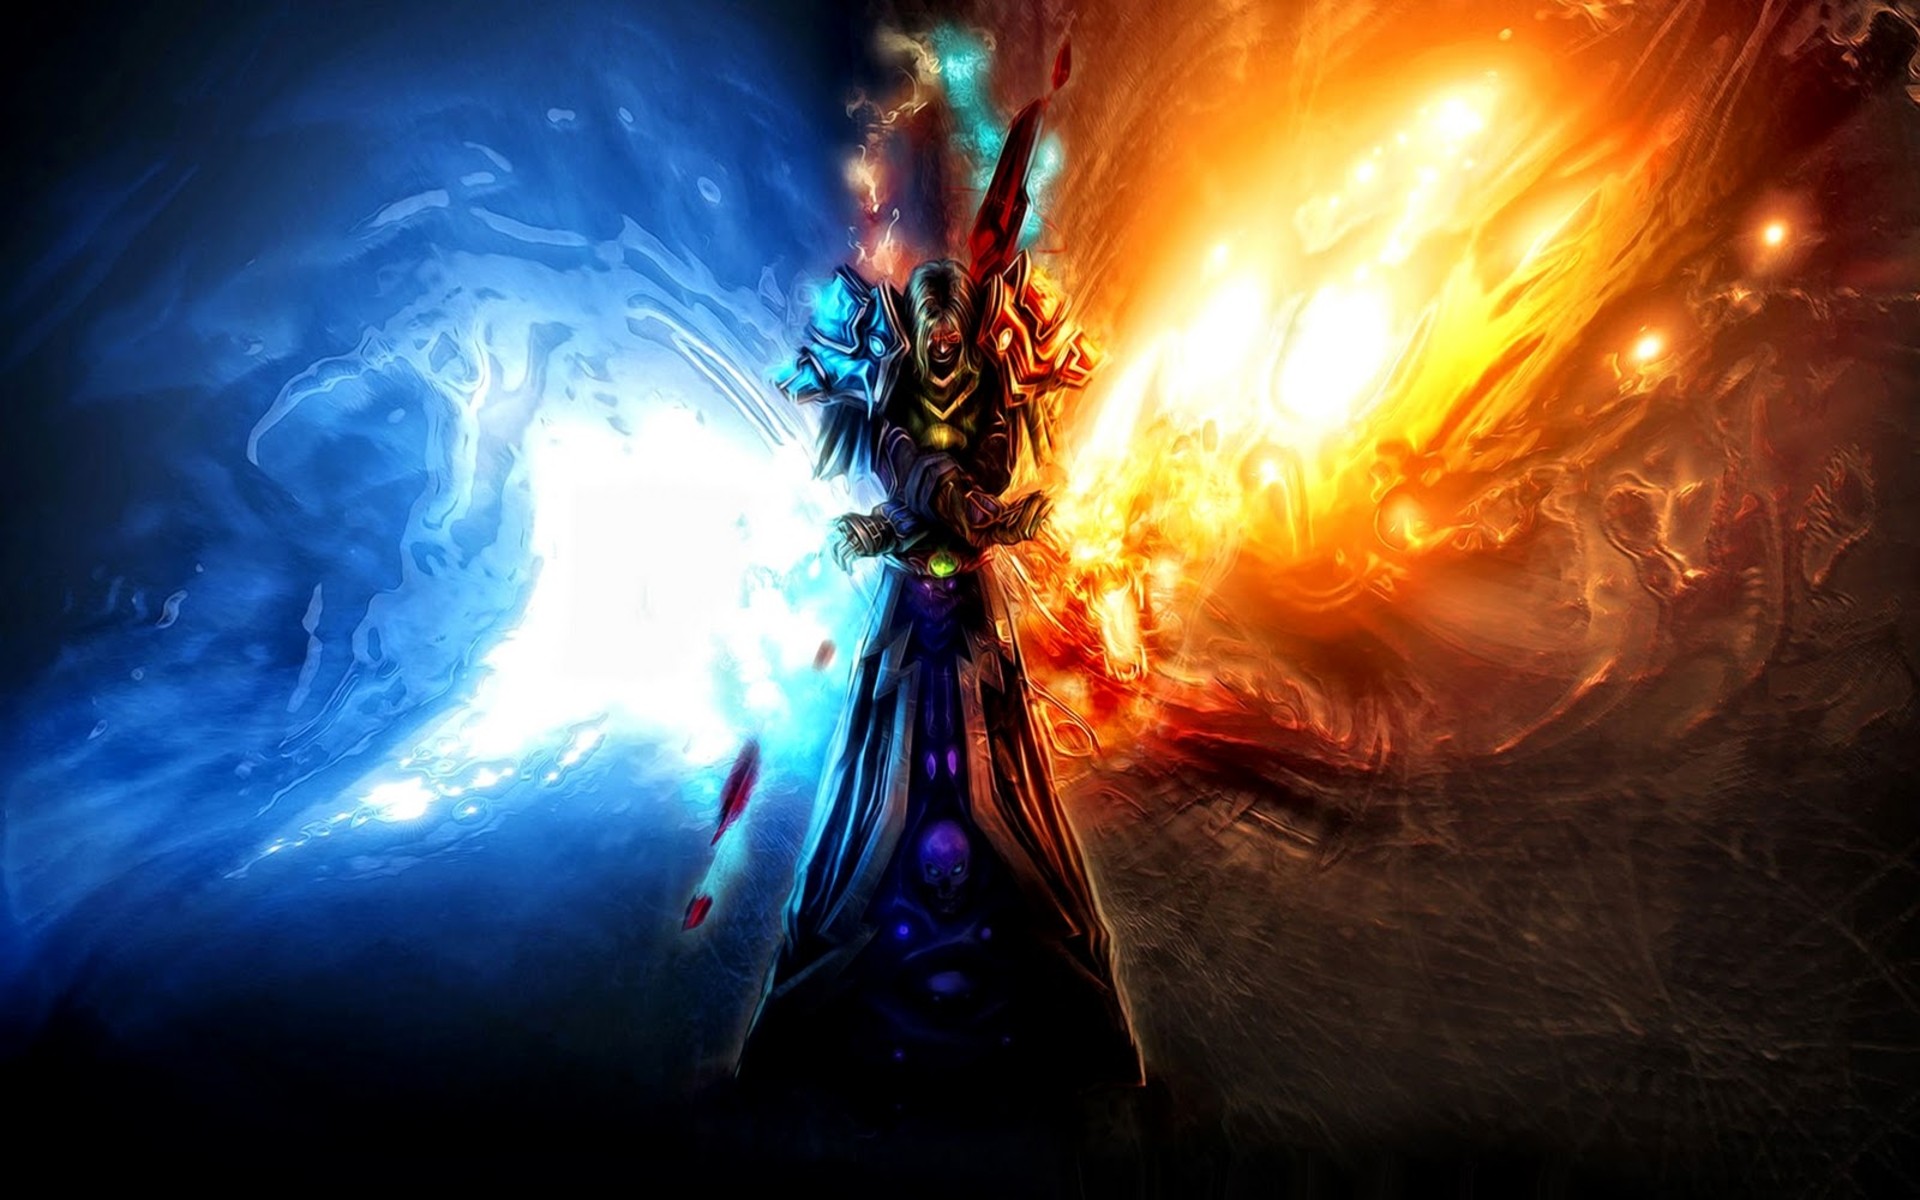 1920x1200 Cool Fire And Ice Backgrounds Images & Pictures - Becuo